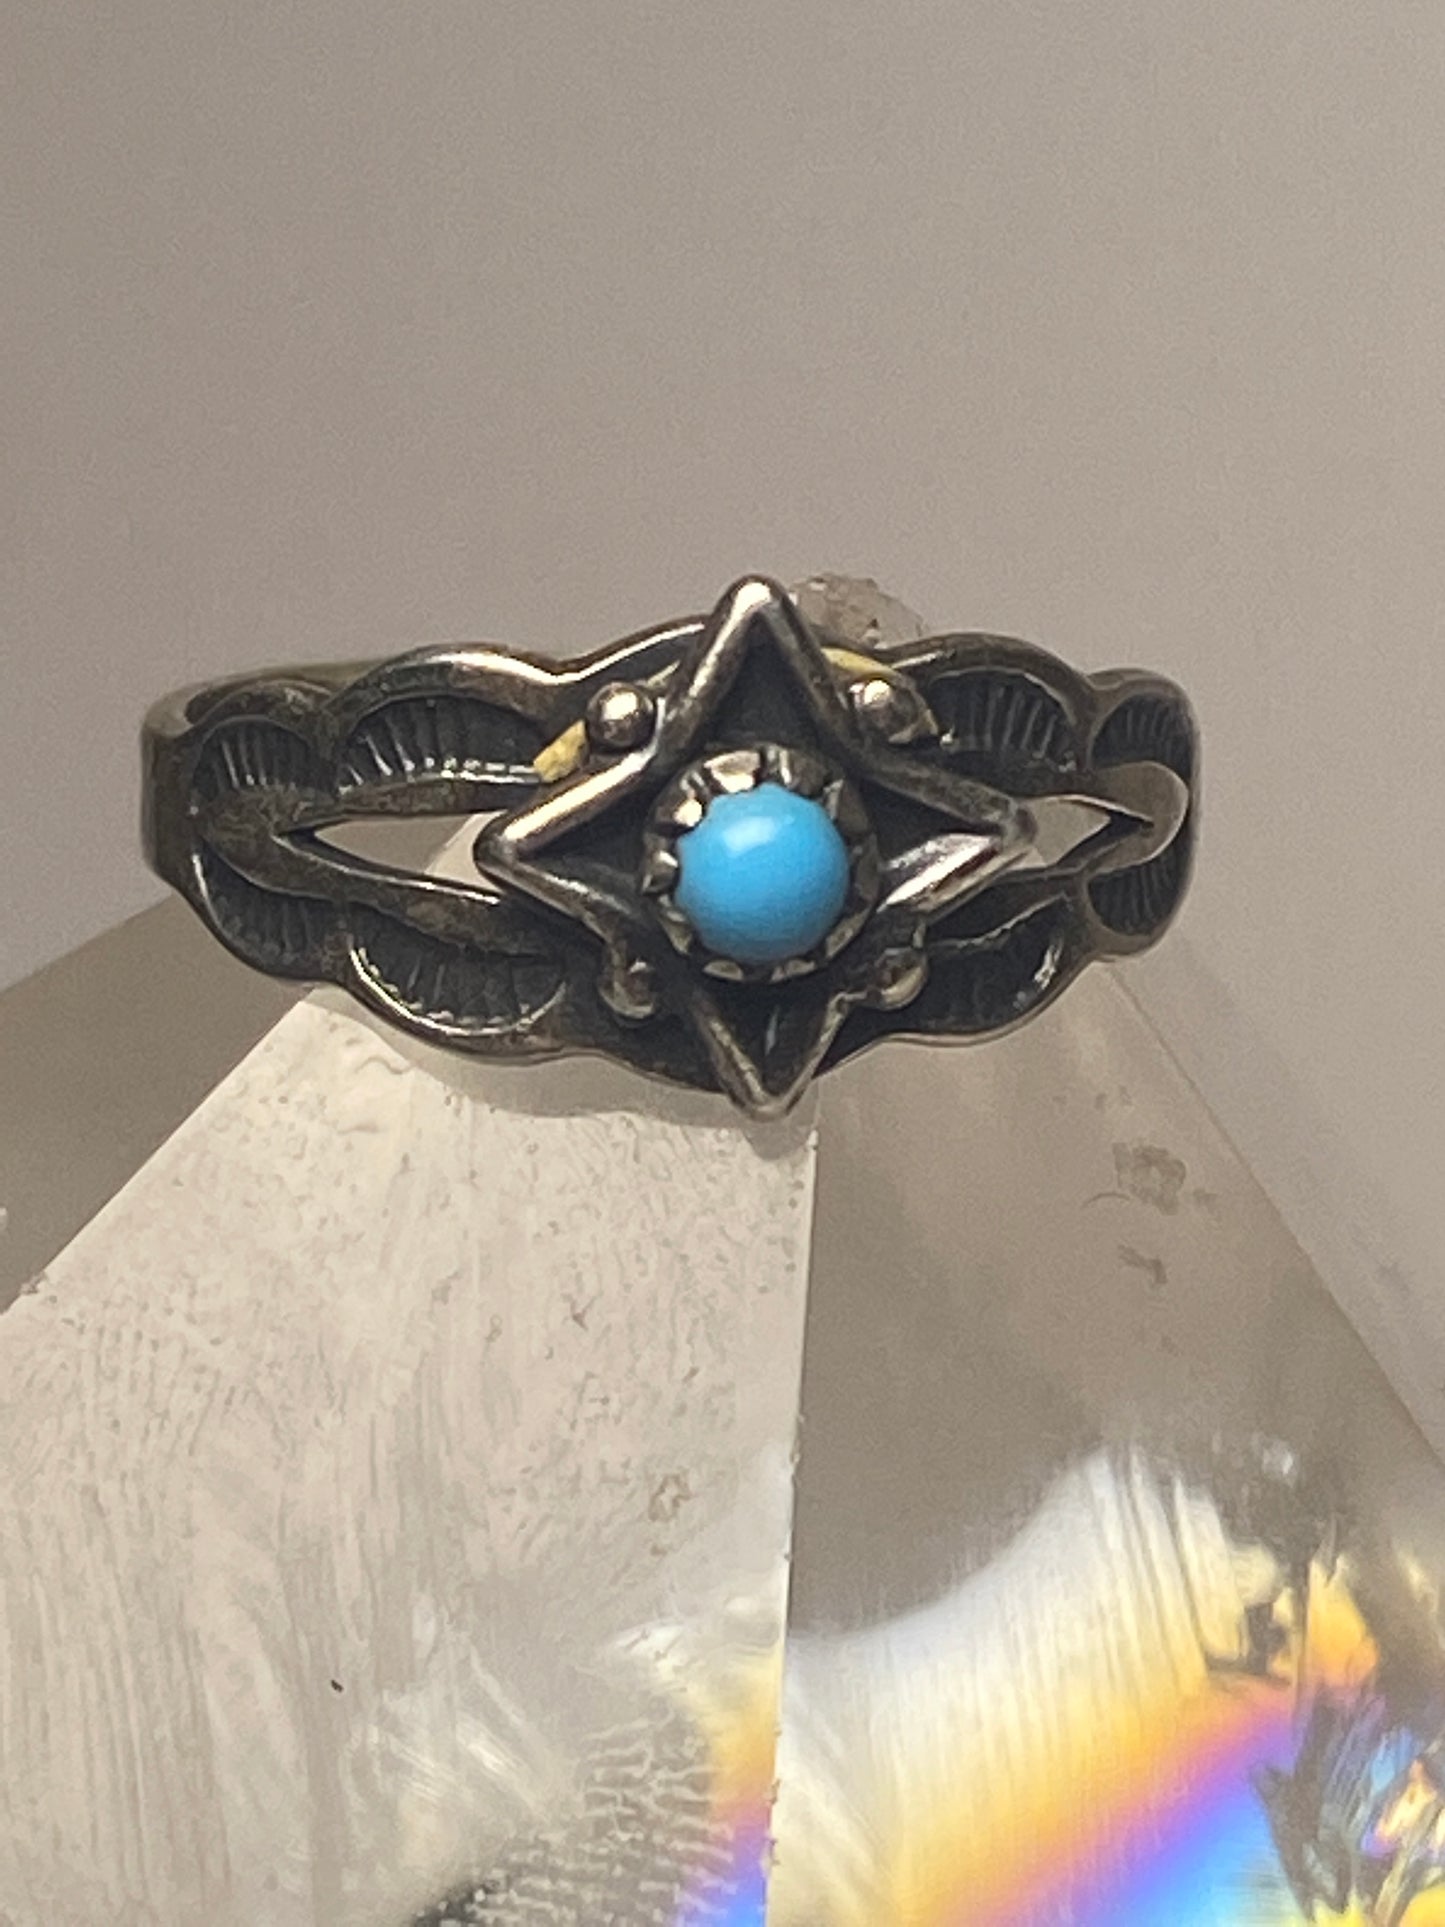 Turquoise ring Bell southwestern long sterling silver women girls baby band